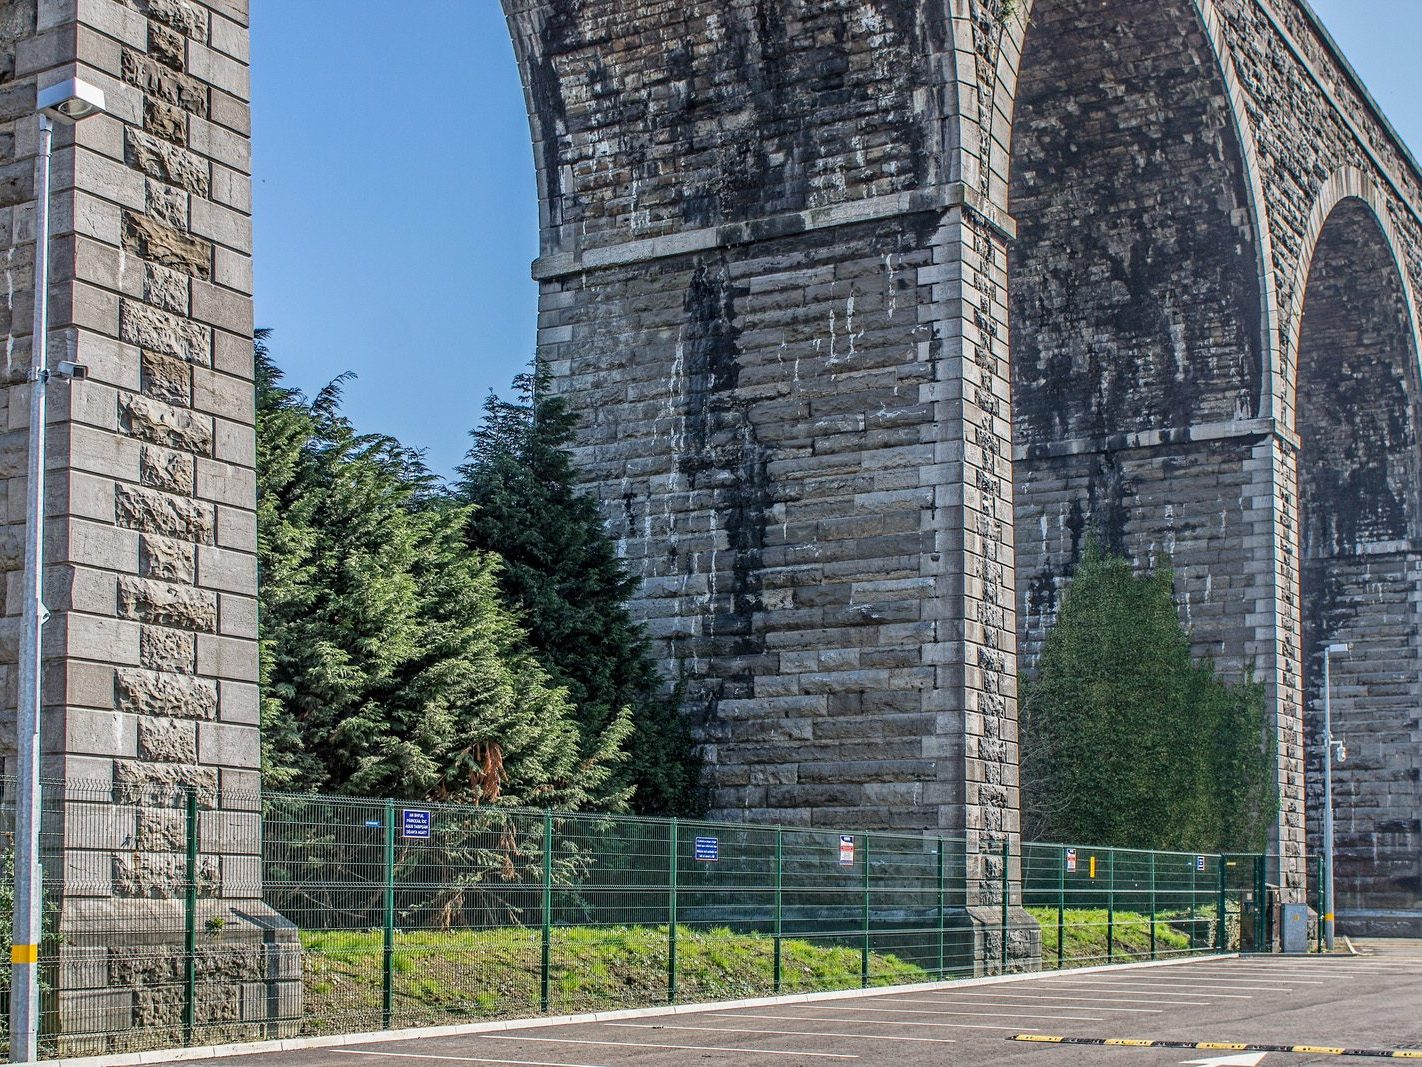 THE BOYNE VIADUCT AS IT WAS IN 2012 [RESTORATION WORK WAS UNDERWAY AT THE TIME]-224197-1